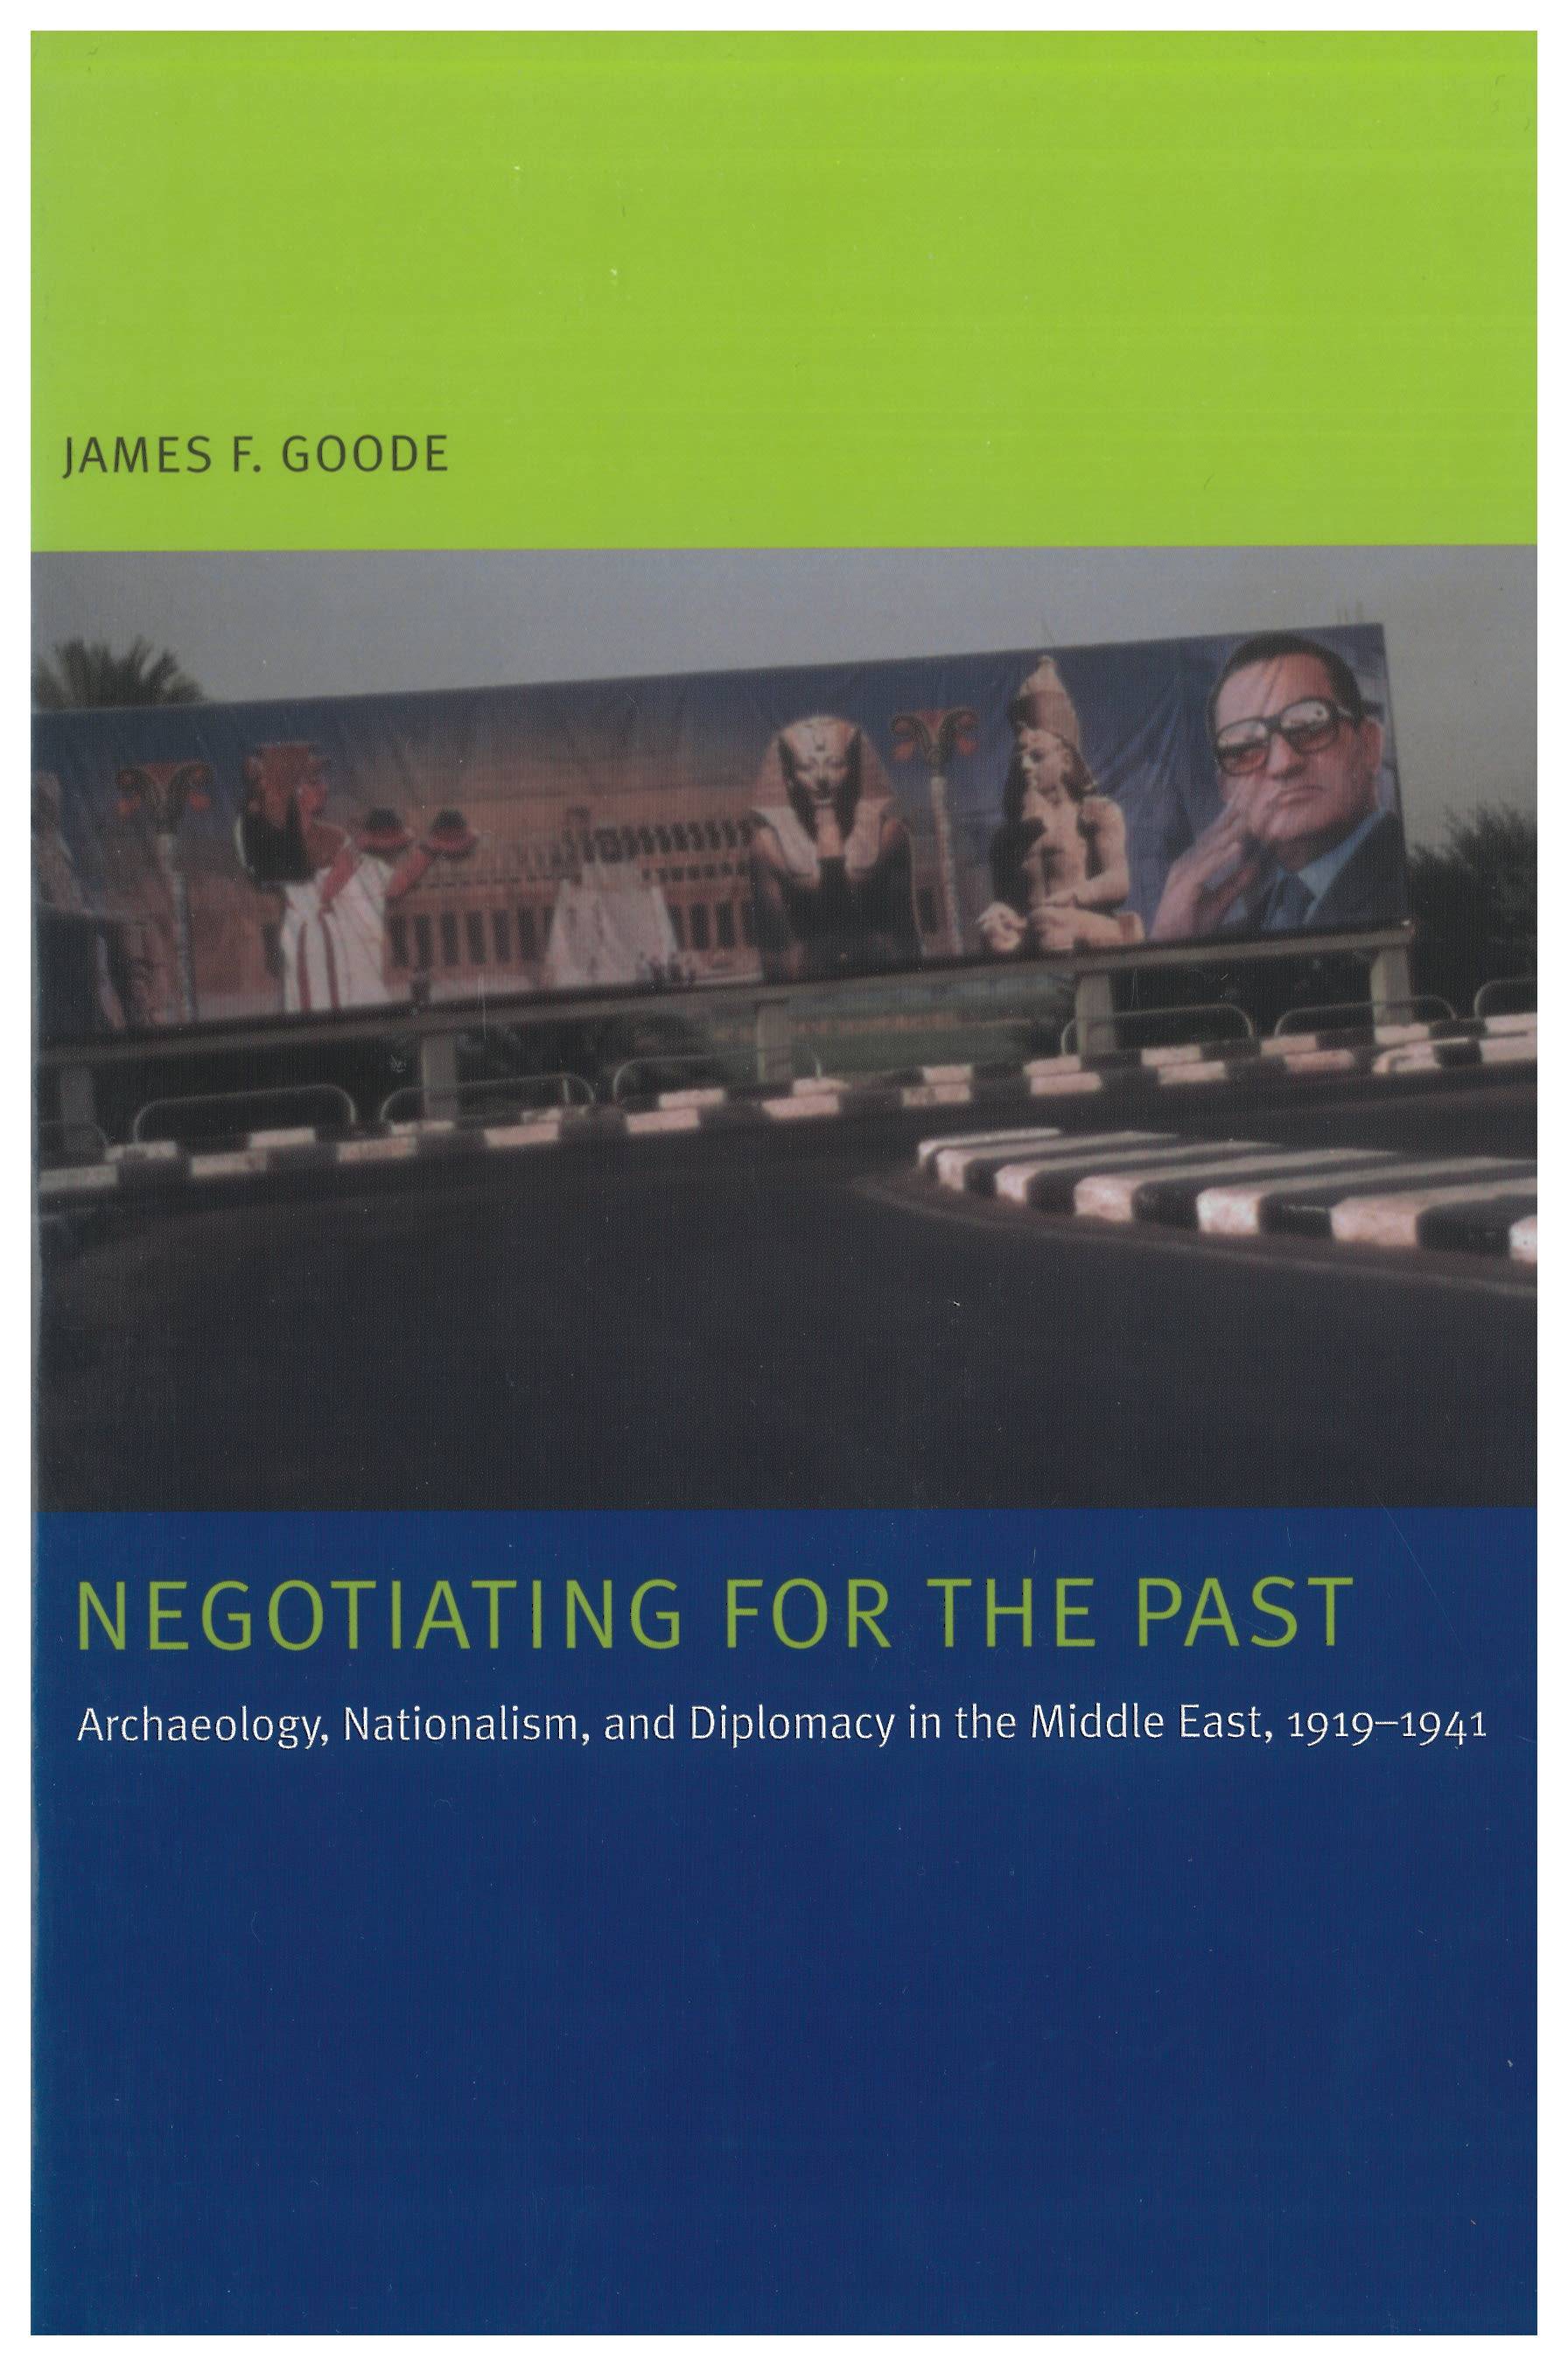 Negotiating for the Past